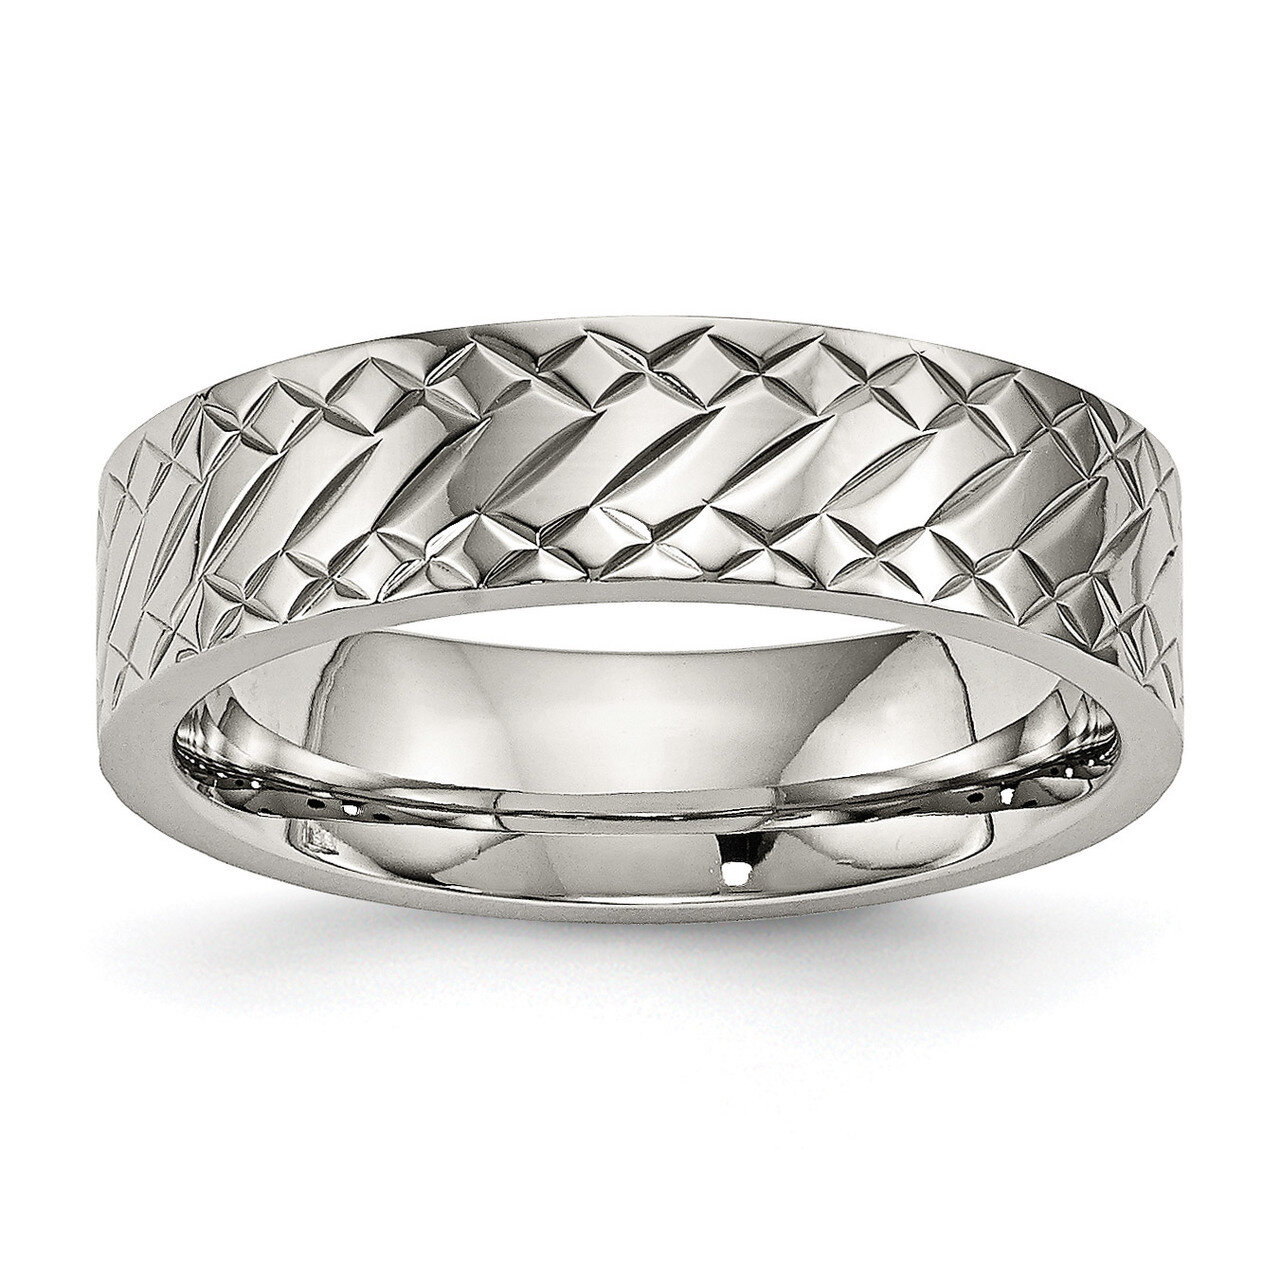 Ring Stainless Steel Polished Textured SR495